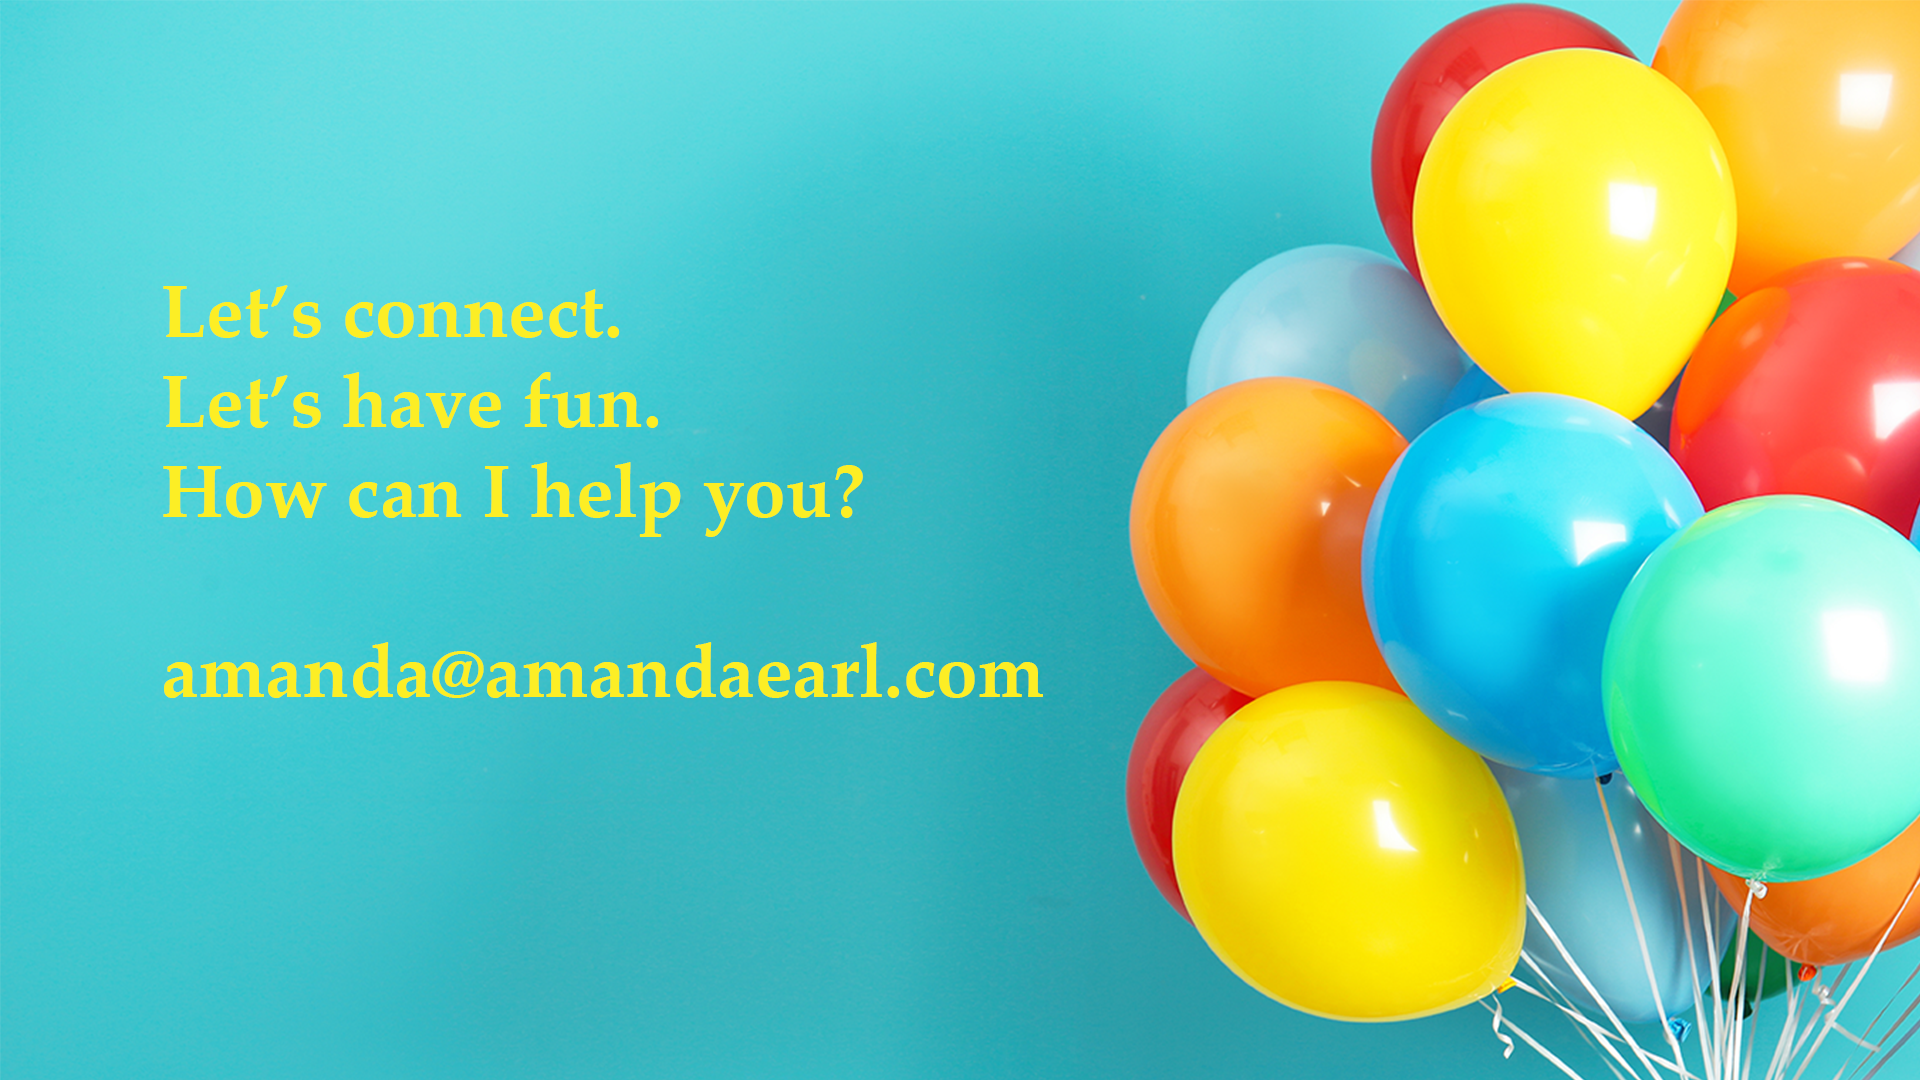 yellow text: Let's connect./Let's have fun. How can I help you? amanda@amandaearl.com. Imagine: blue background, balloons.